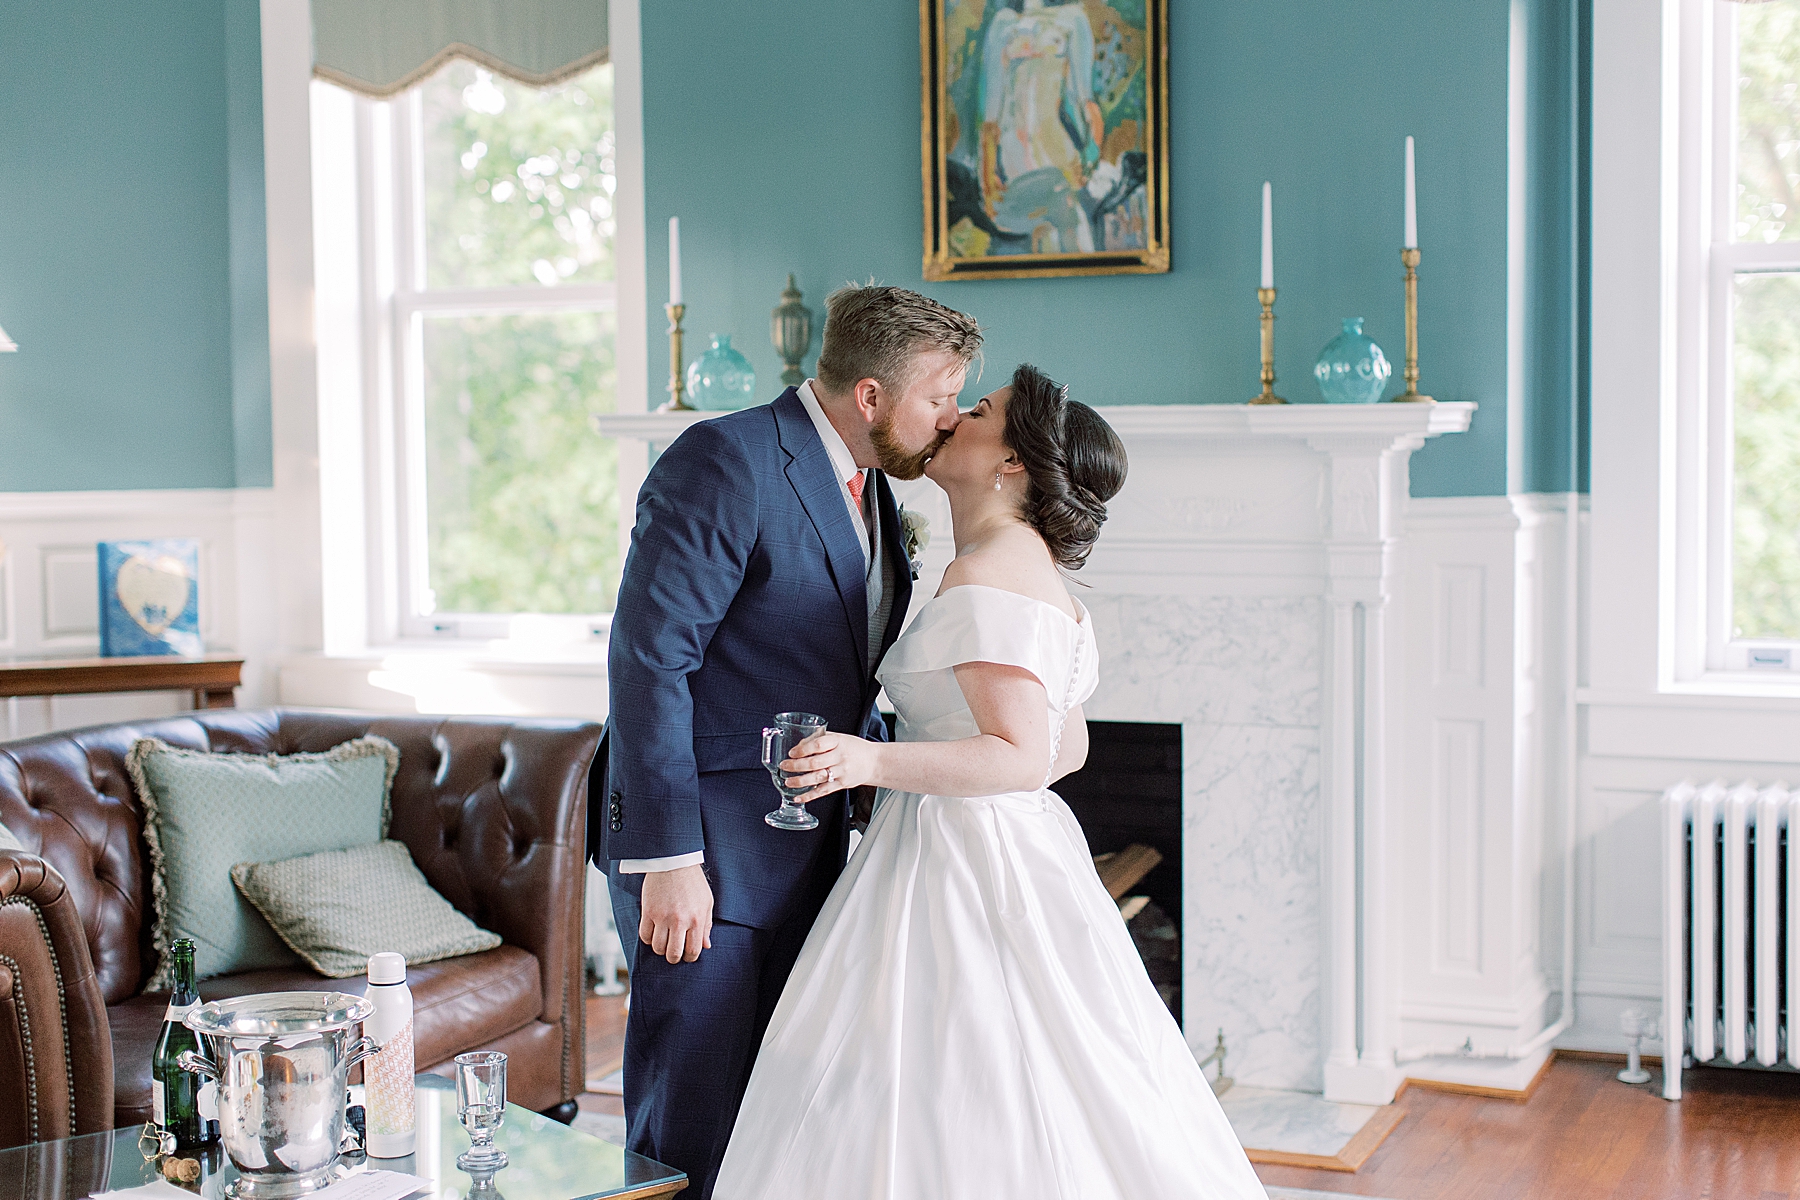 newlyweds kiss by fireplace and teal wall at Bellevue Hall